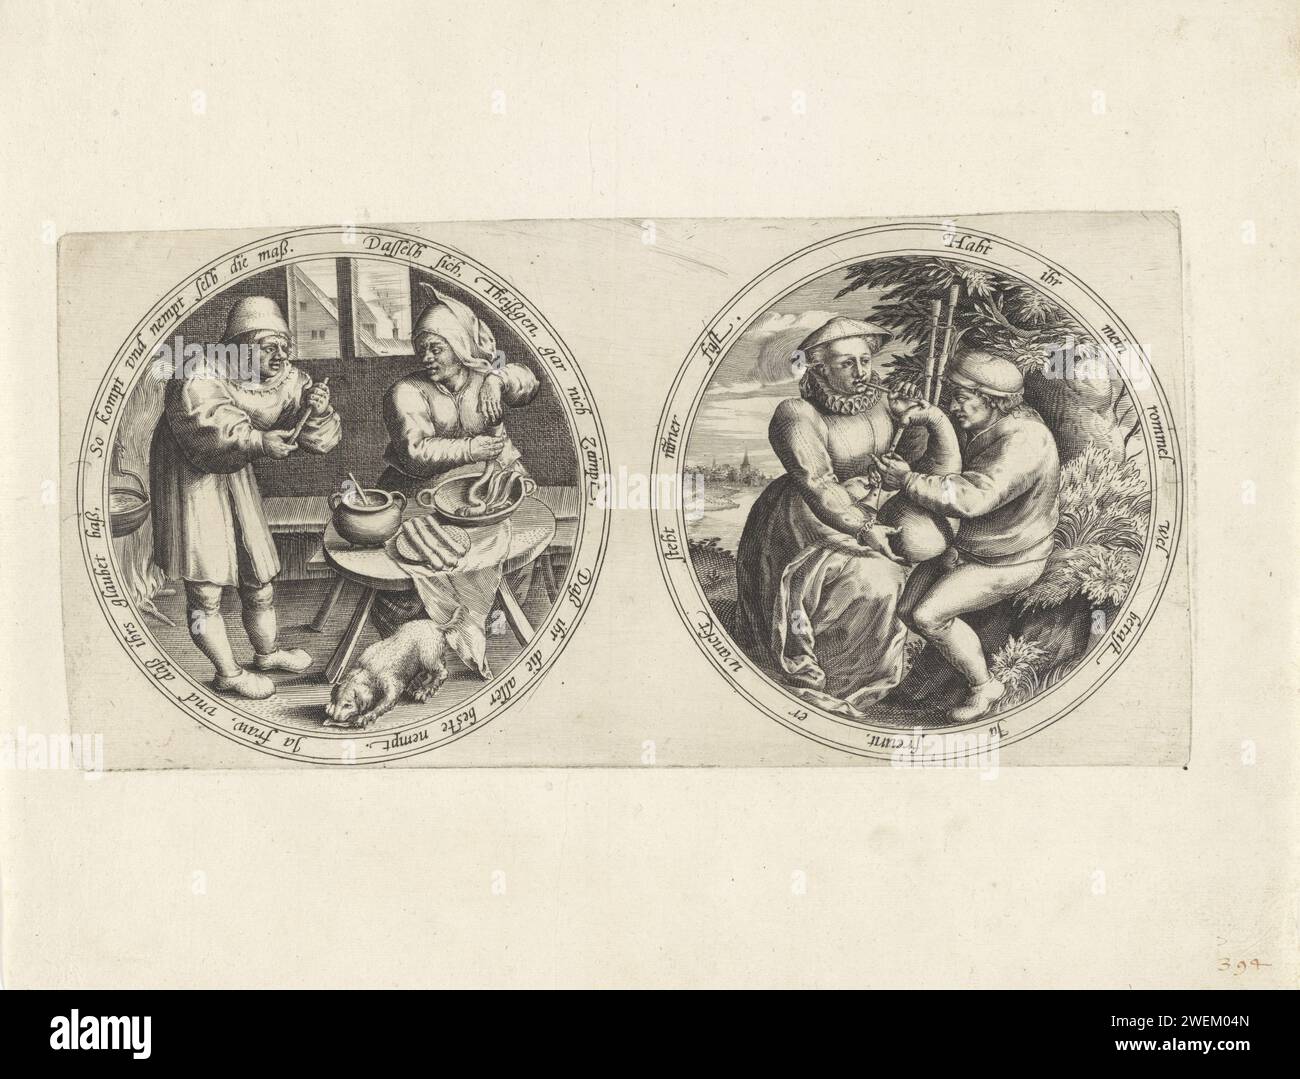 Sausage makers and a bagpipe player, Anonymous, After Marten van Cleve (I), 1555 - 1631 print Two medallions with an ambiguous edge in German. On the left medallion, a woman turns a sausage at a table. Next to her is a man with a dumb stick in his hand. A dog is eating under the table. Behind them a pot hangs above the fire. On the right medallion, a woman plays a bagpipe outside under the supervision of a man.  paper engraving butcher, slaughterman. sausage. bagpipe, musette - CC - out of doors. sensuality Stock Photo